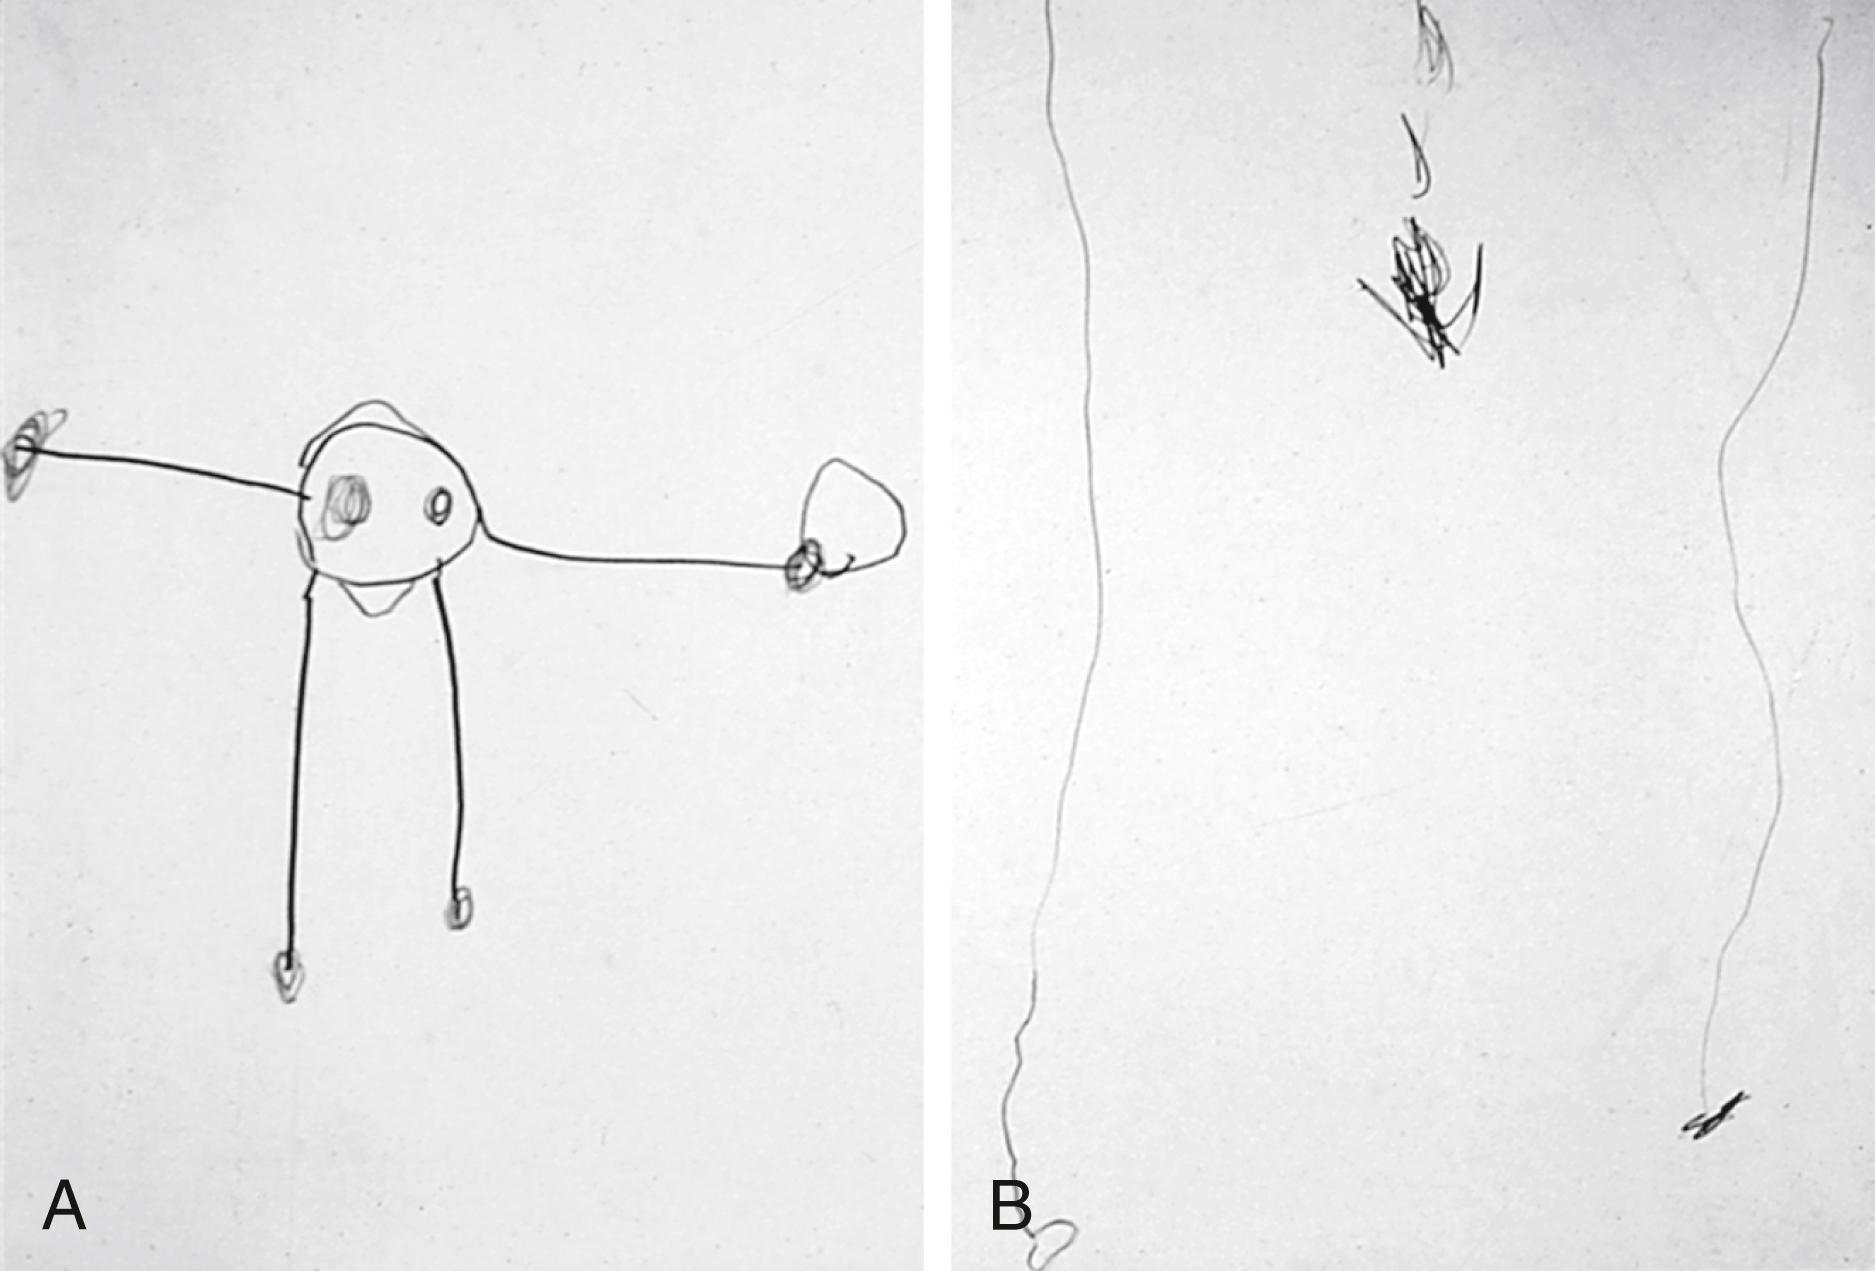 Fig. 3.21, Difficulties with visual/fine motor integration skills in a child with cerebral palsy. (A) Drawing by a bright 4 year old who was born prematurely but showed no developmental delays. Note the inclusion of seven features: eyes, hair, mouth, arms, hands, legs, and feet. The age equivalent for this drawing is 4¾ years old. (B) Drawing by a 4-year-old child with spastic diplegia. Difficulties in organization appear related to visual motor integration skills rather than to problems with fine motor skills.